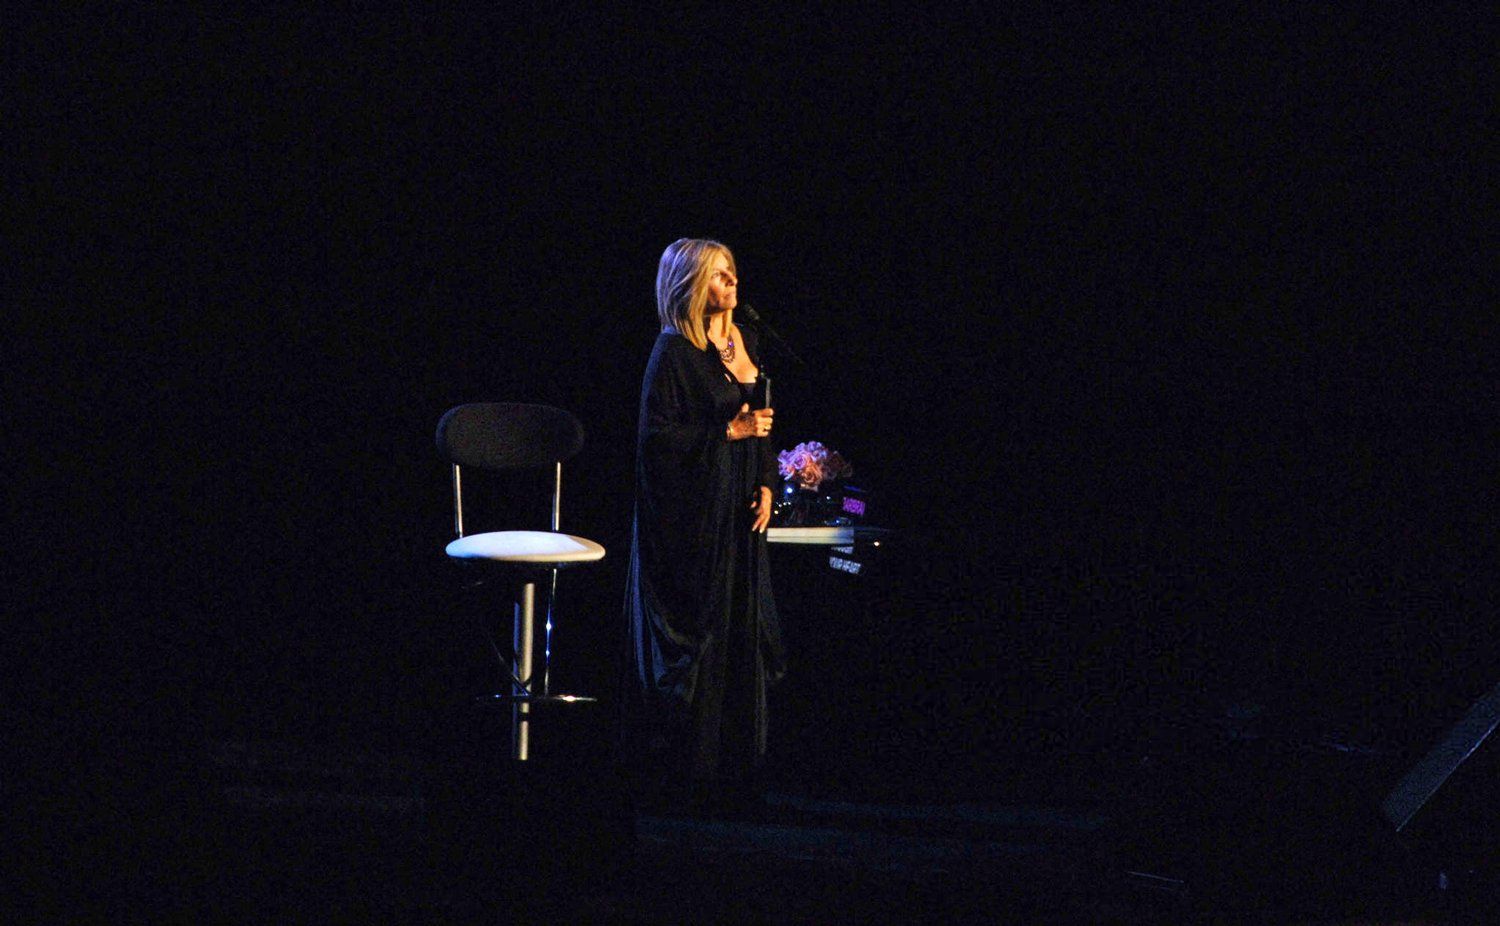 Barbra Streisand singing on stage at Planet Hollywood, Las Vegas, 2007. Photo by Dave M . Benett